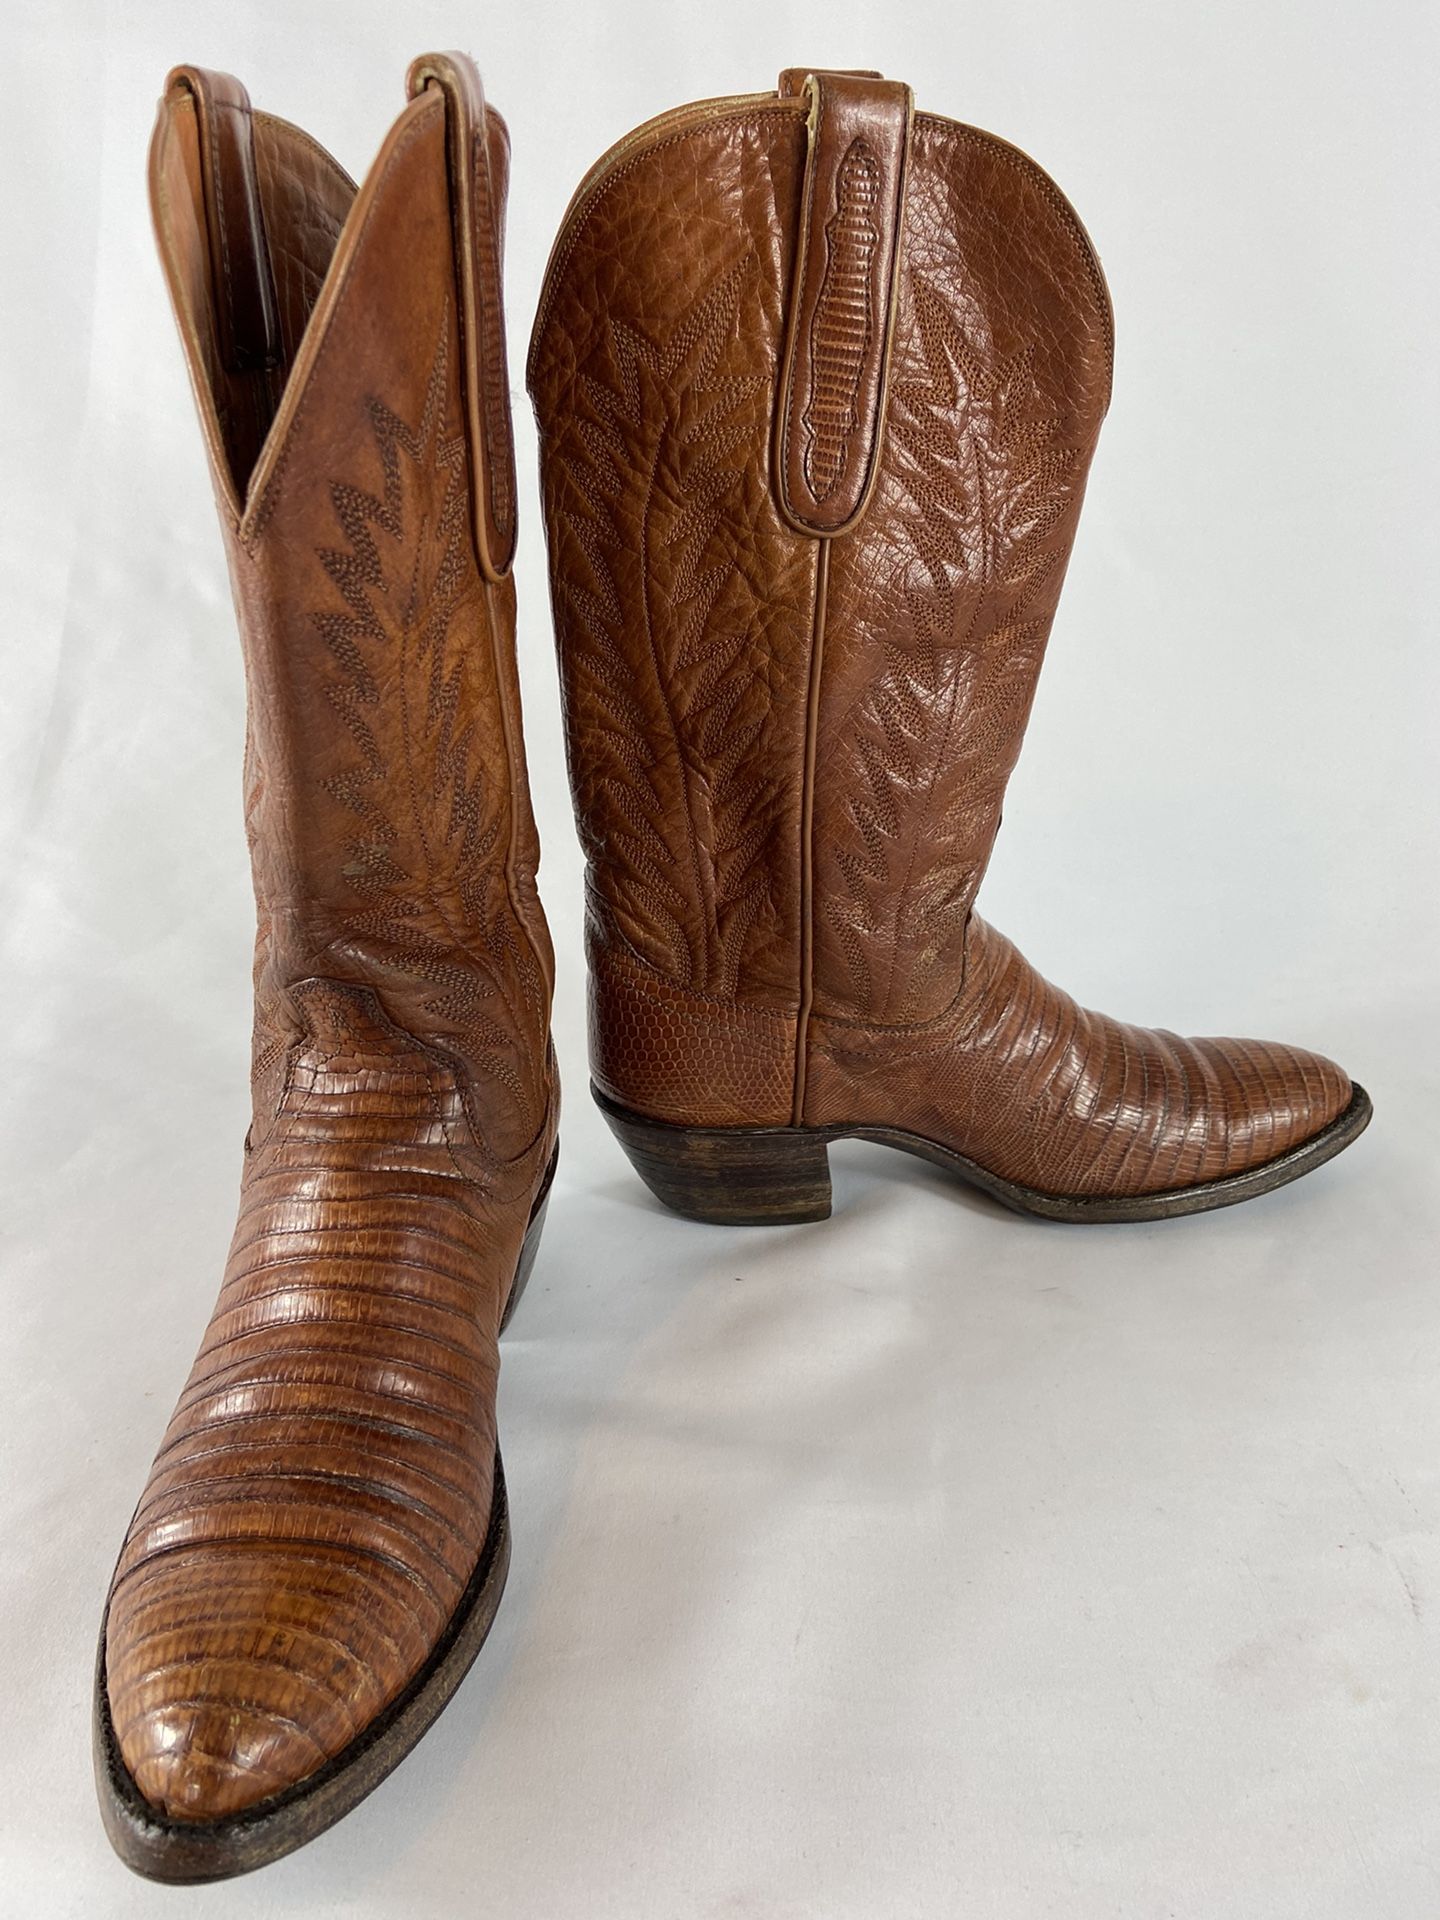 Vintage Tres Outlaws Falconhead Womens Boots Size 5.5 Lizard Skin *Read Notes*